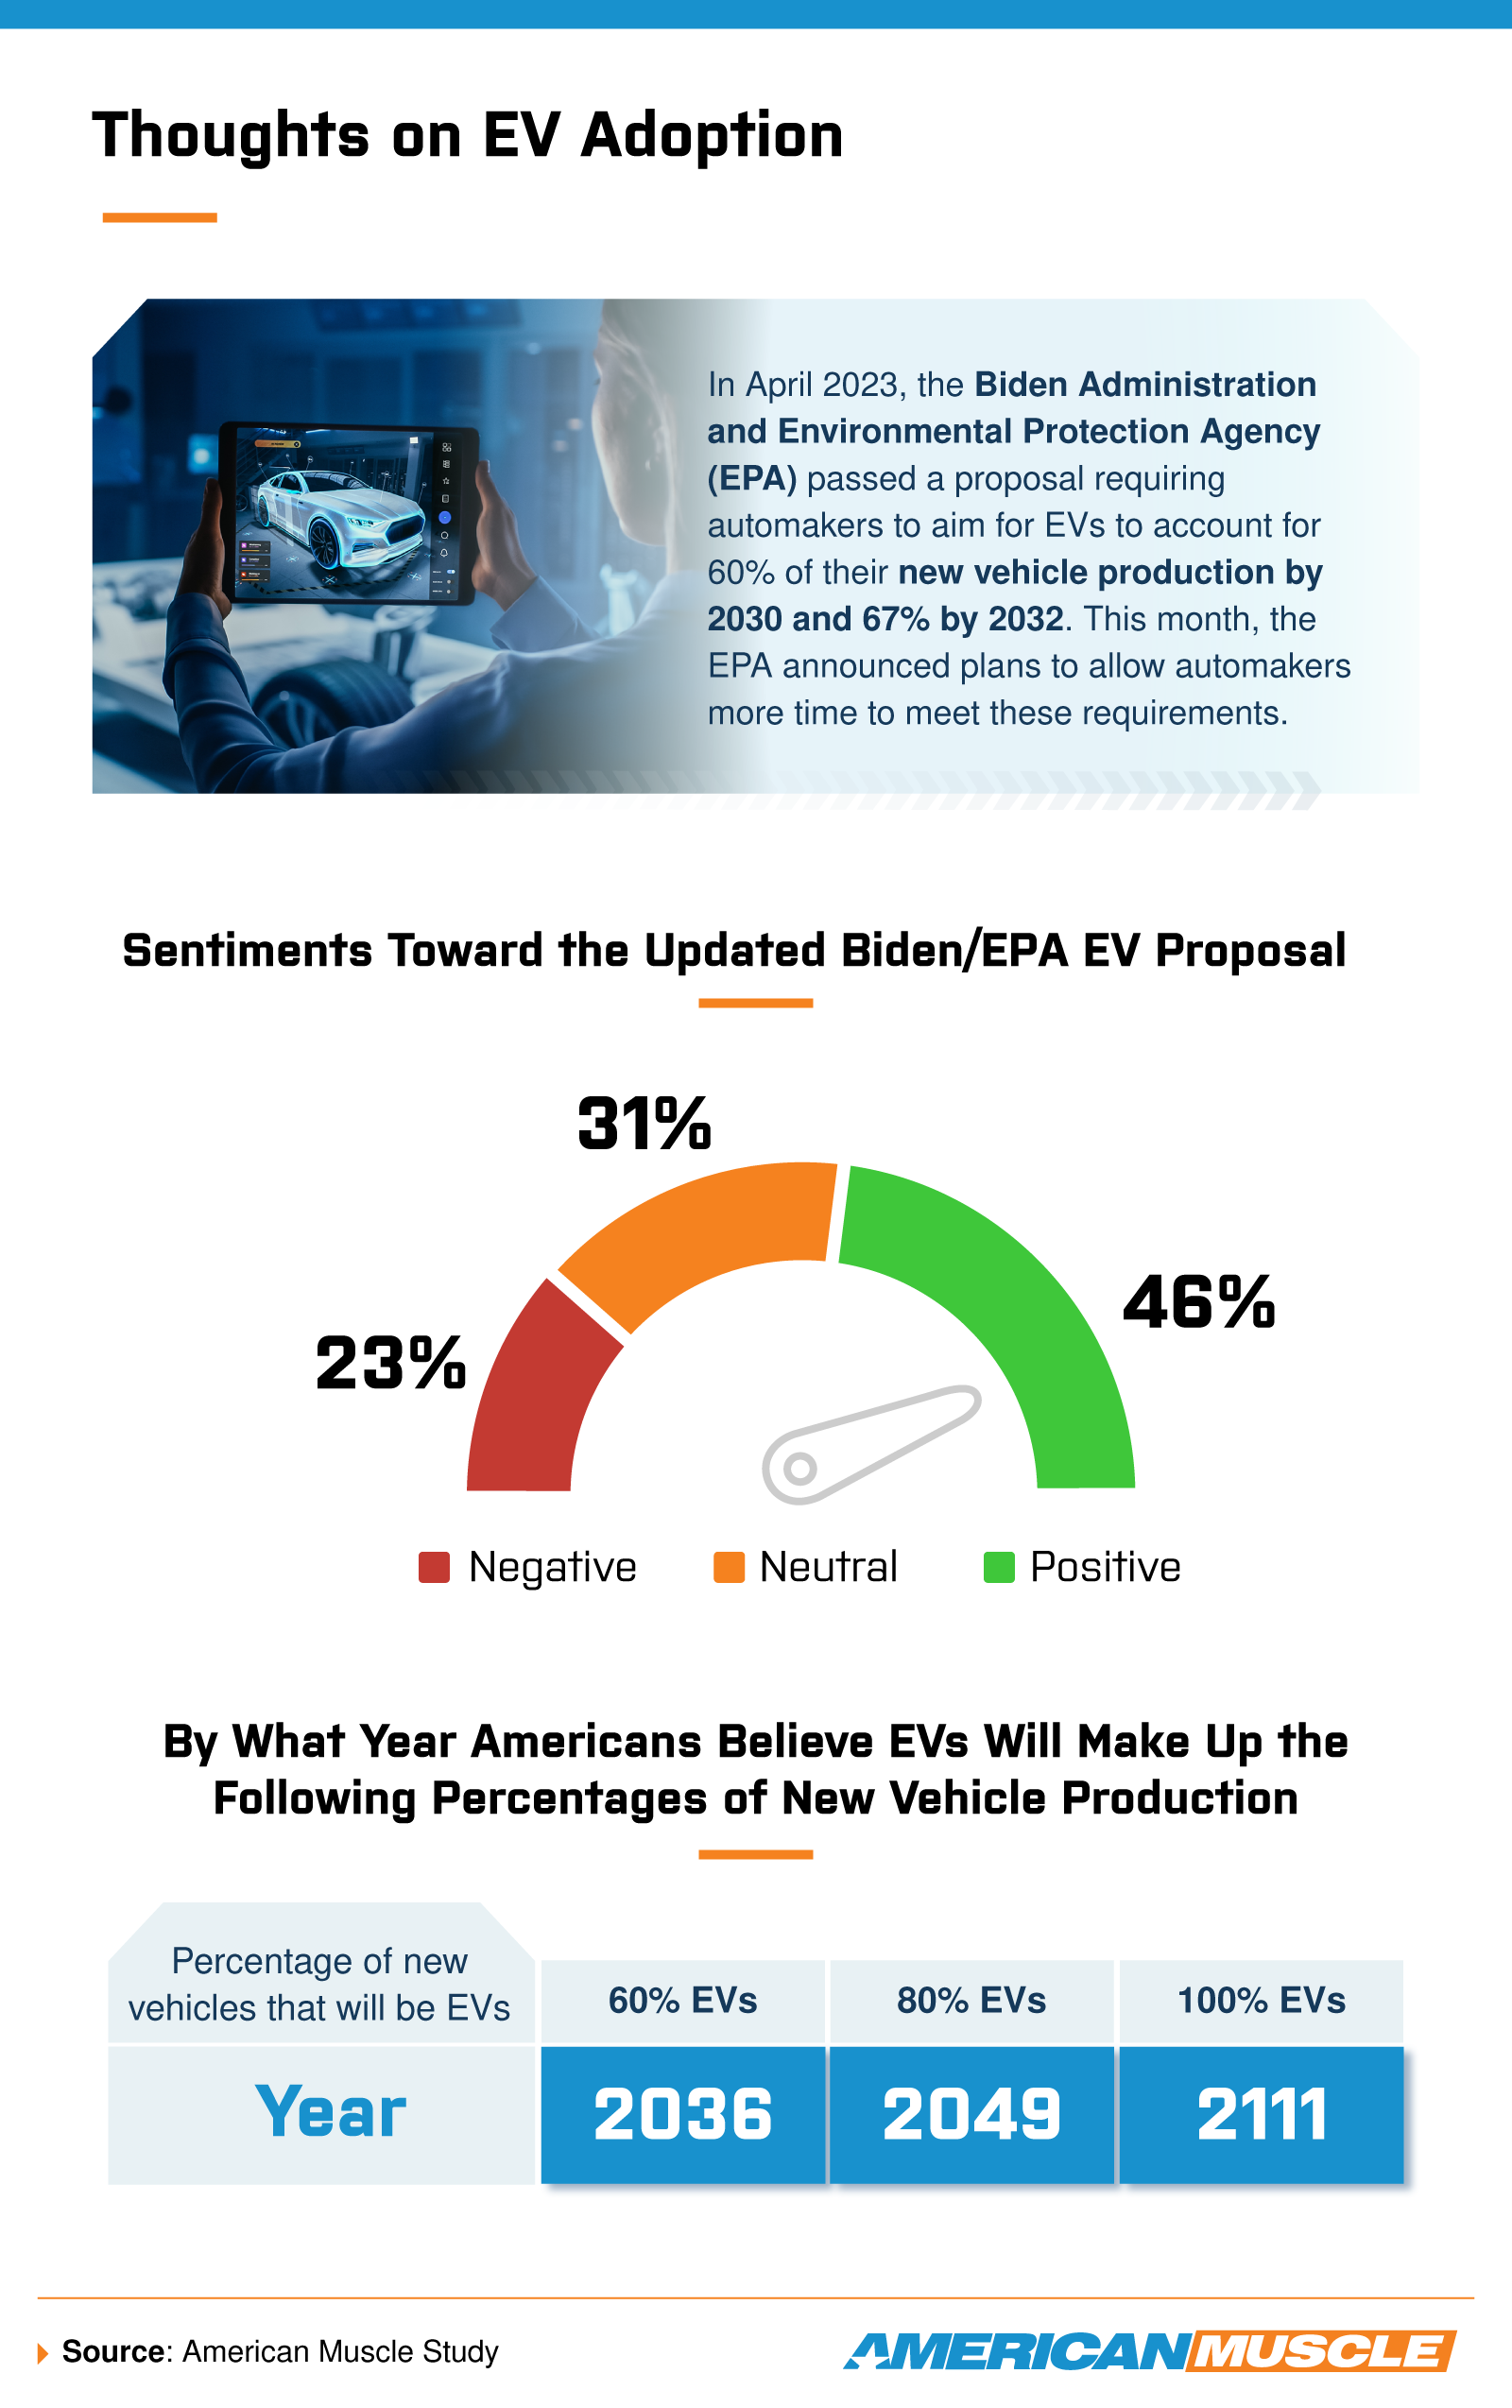 An infographic showing American's thoughts on EV future